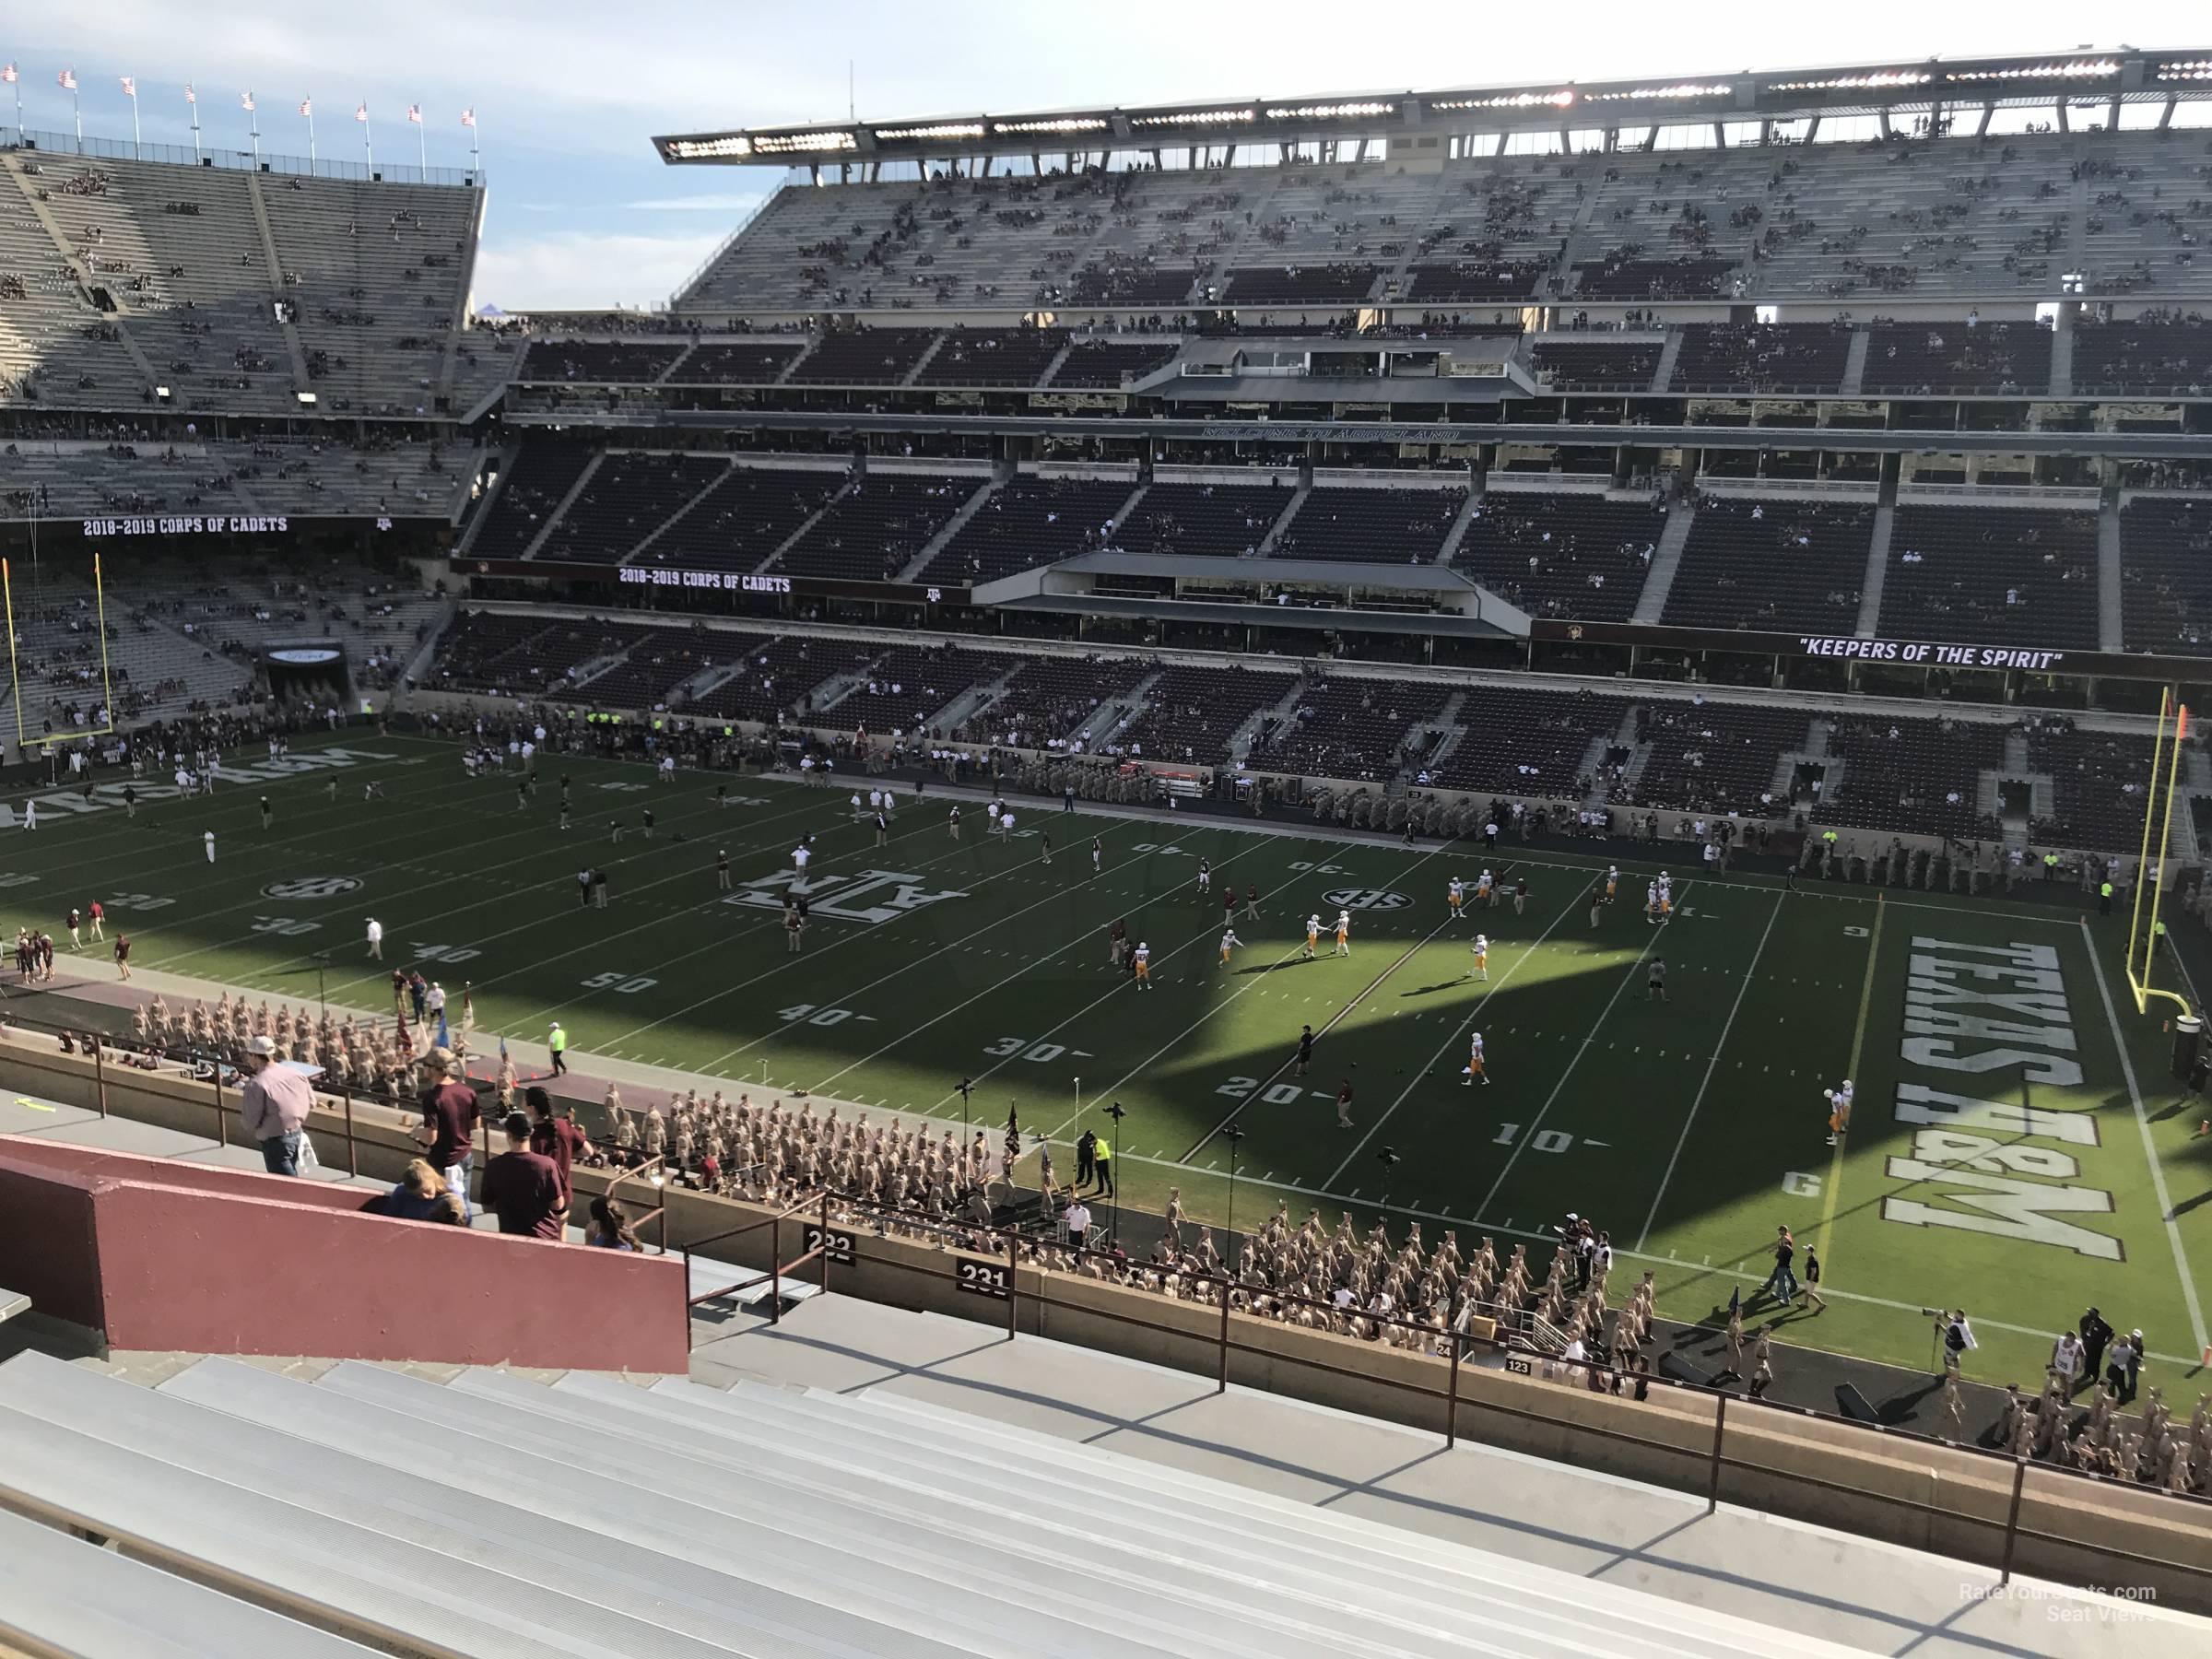 section 231, row 20 seat view  - kyle field